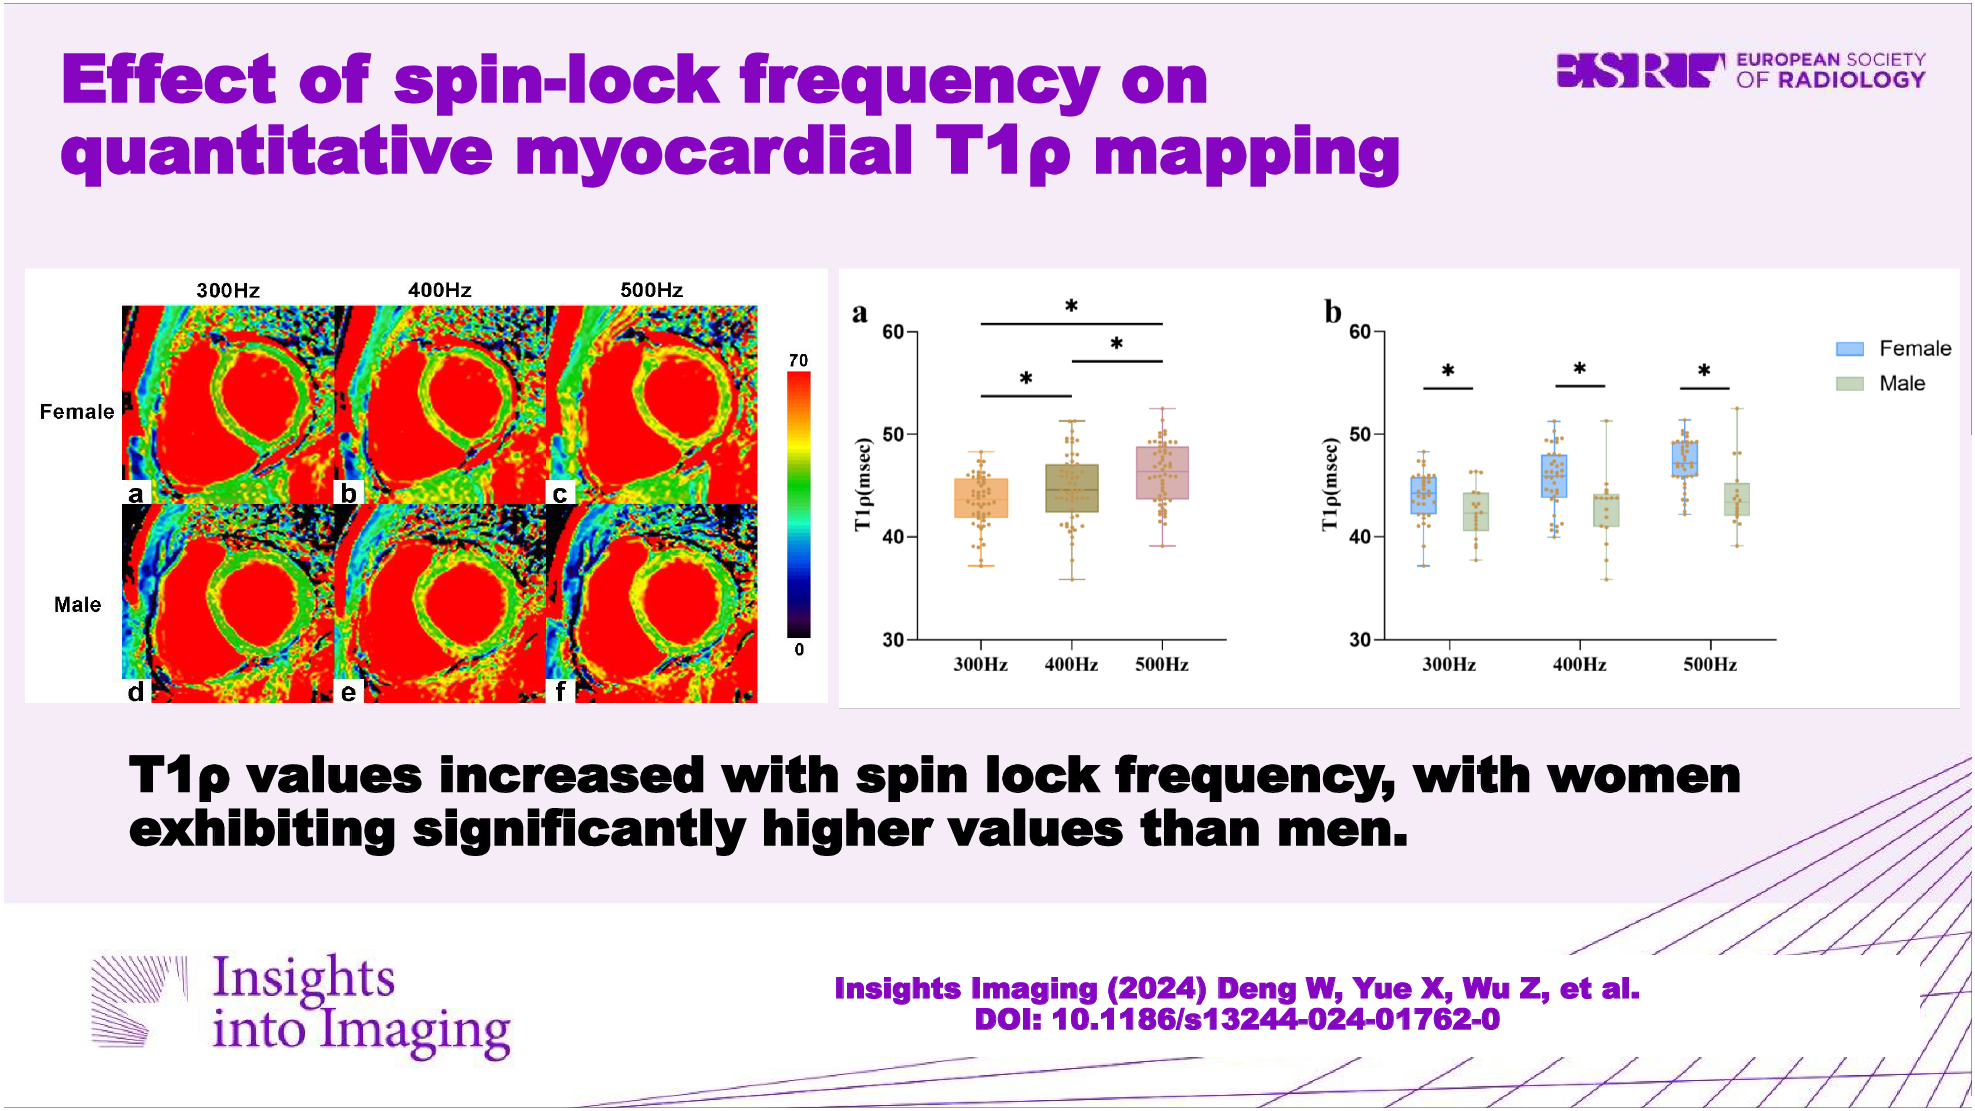 Effect of spin-lock frequency on quantitative myocardial T1ρ mapping